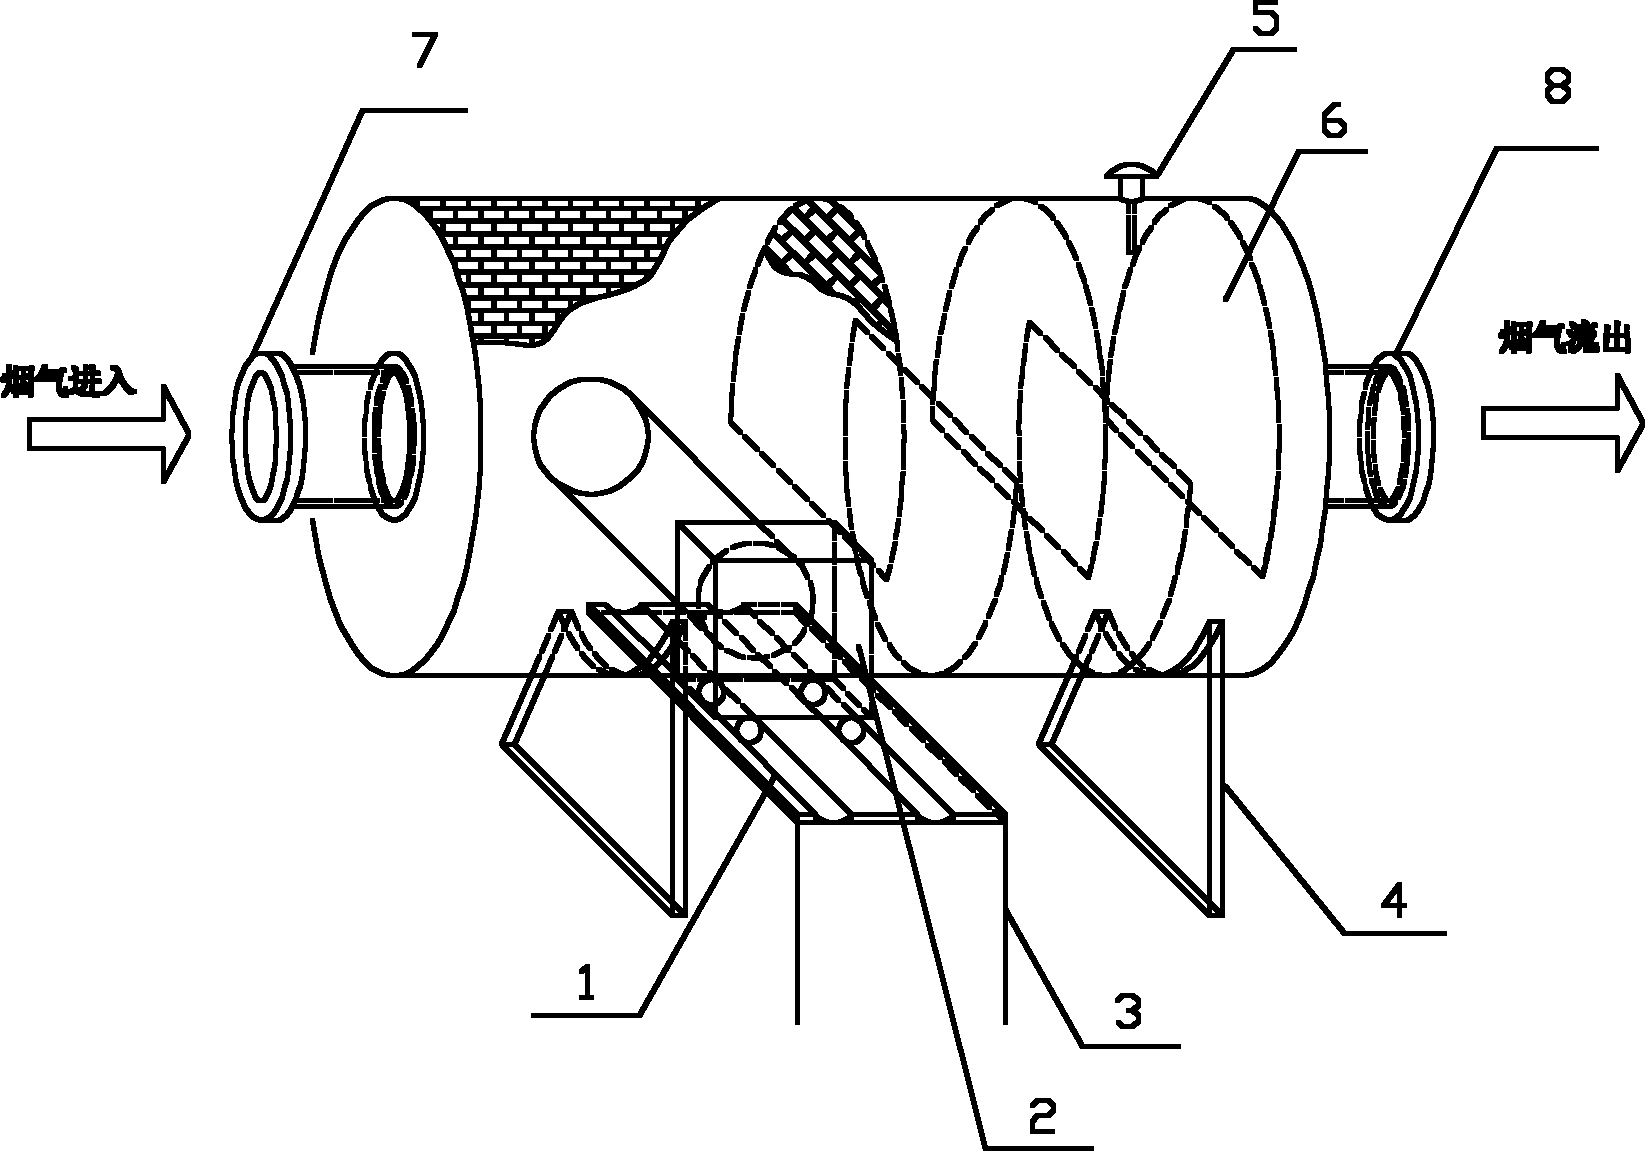 Cremation flue gas purification combustion device